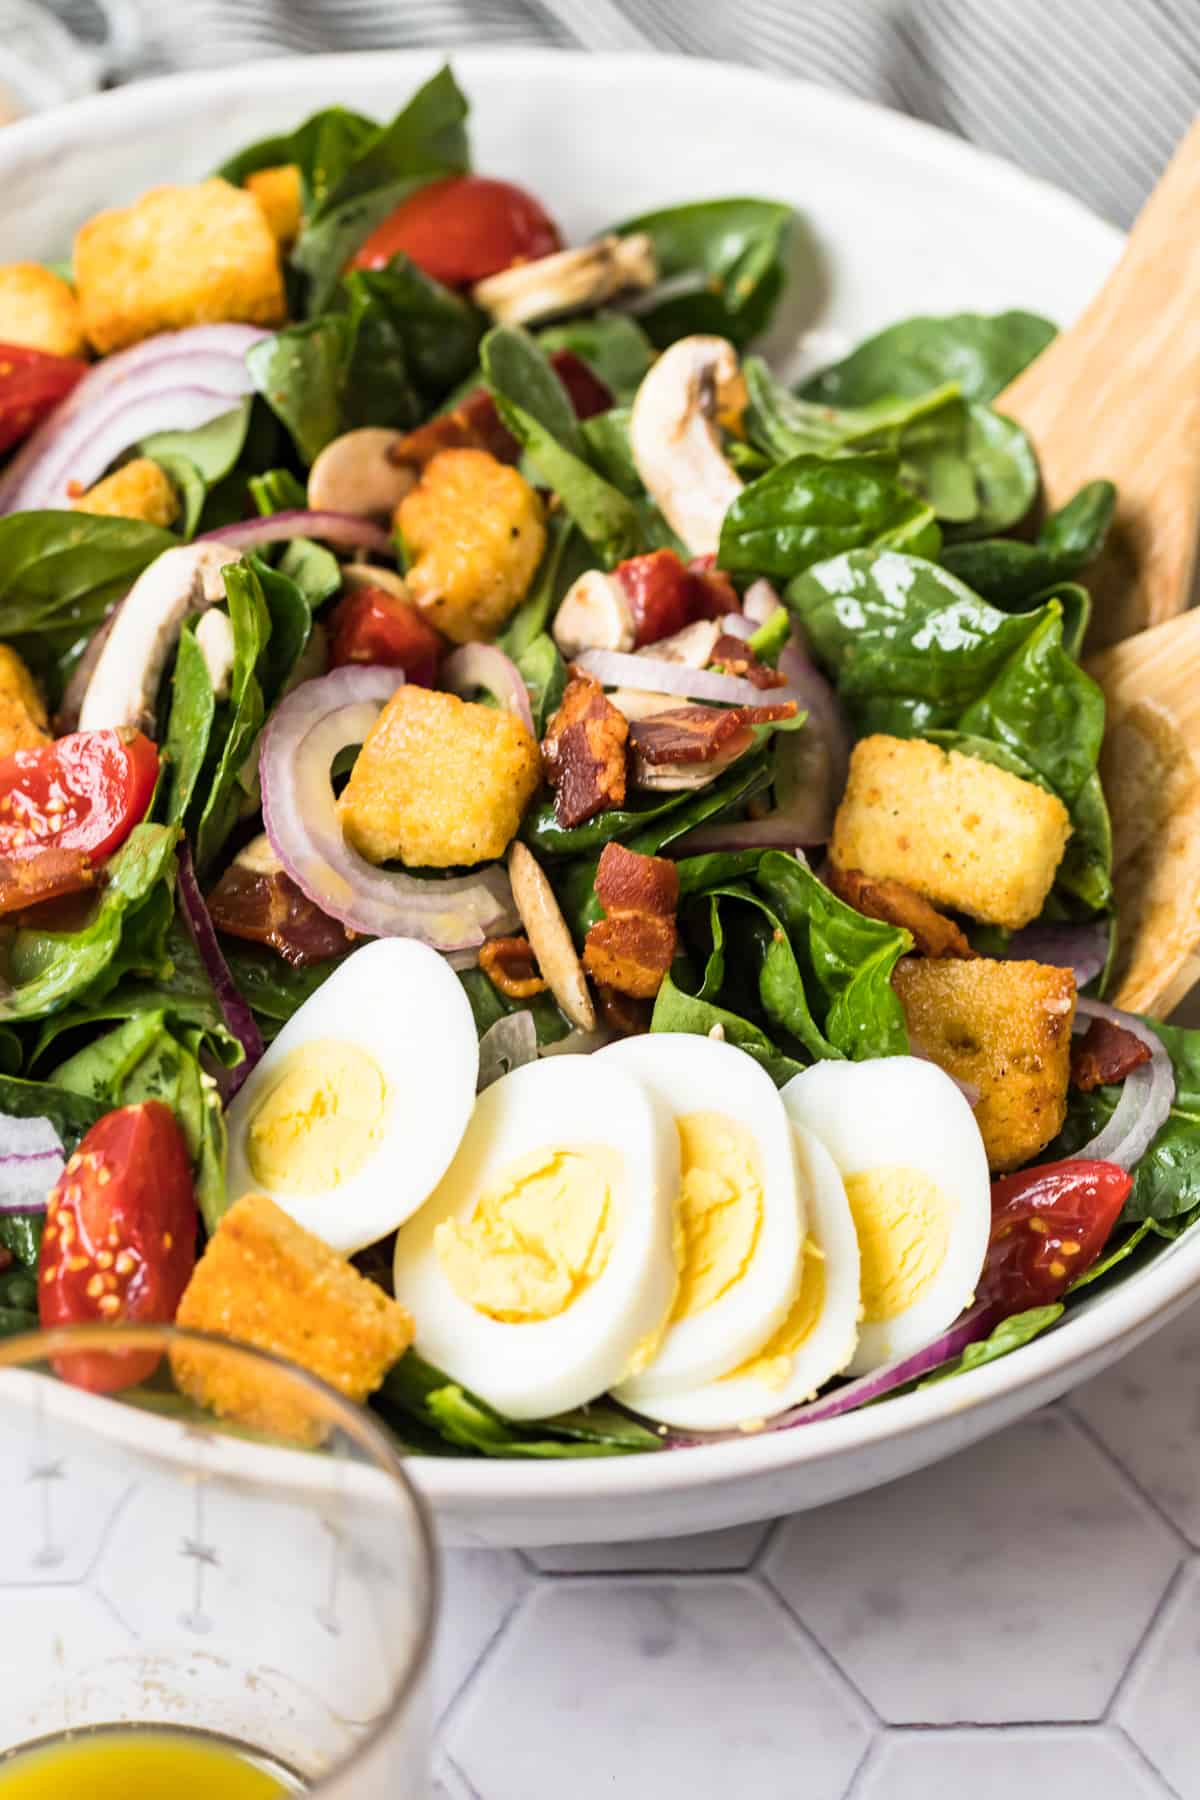 up close image of spinach salad in bowl with wooden spoons